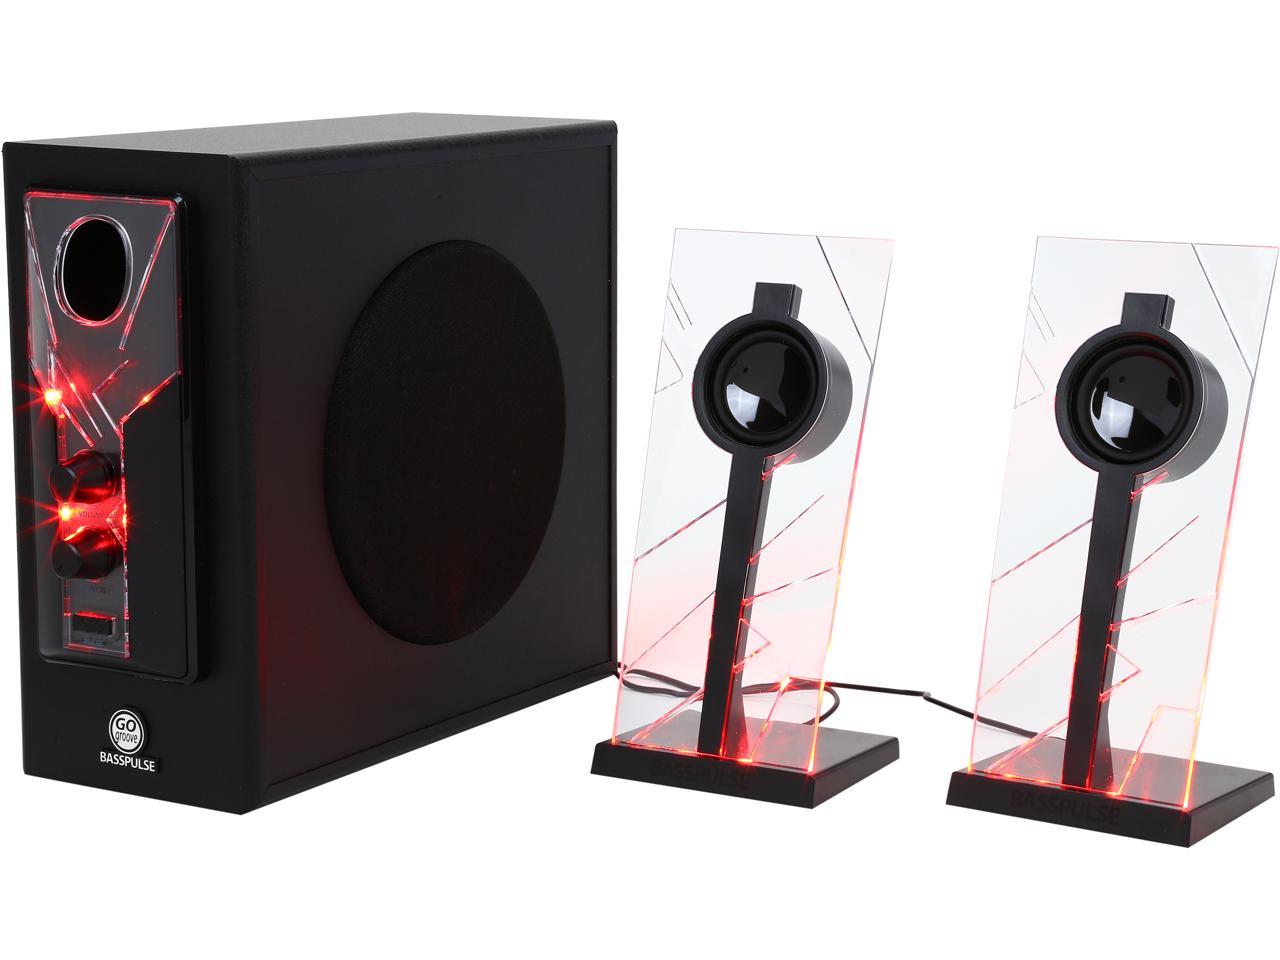 tiener Troosteloos slang Open Box: GOgroove BassPULSE 2.1 Computer Speakers with Red LED Glow Lights  and Powered Subwoofer - Gaming Speaker System for Music on Desktop, Laptop,  PC with 40 Watts, Heavy Bass - Newegg.com